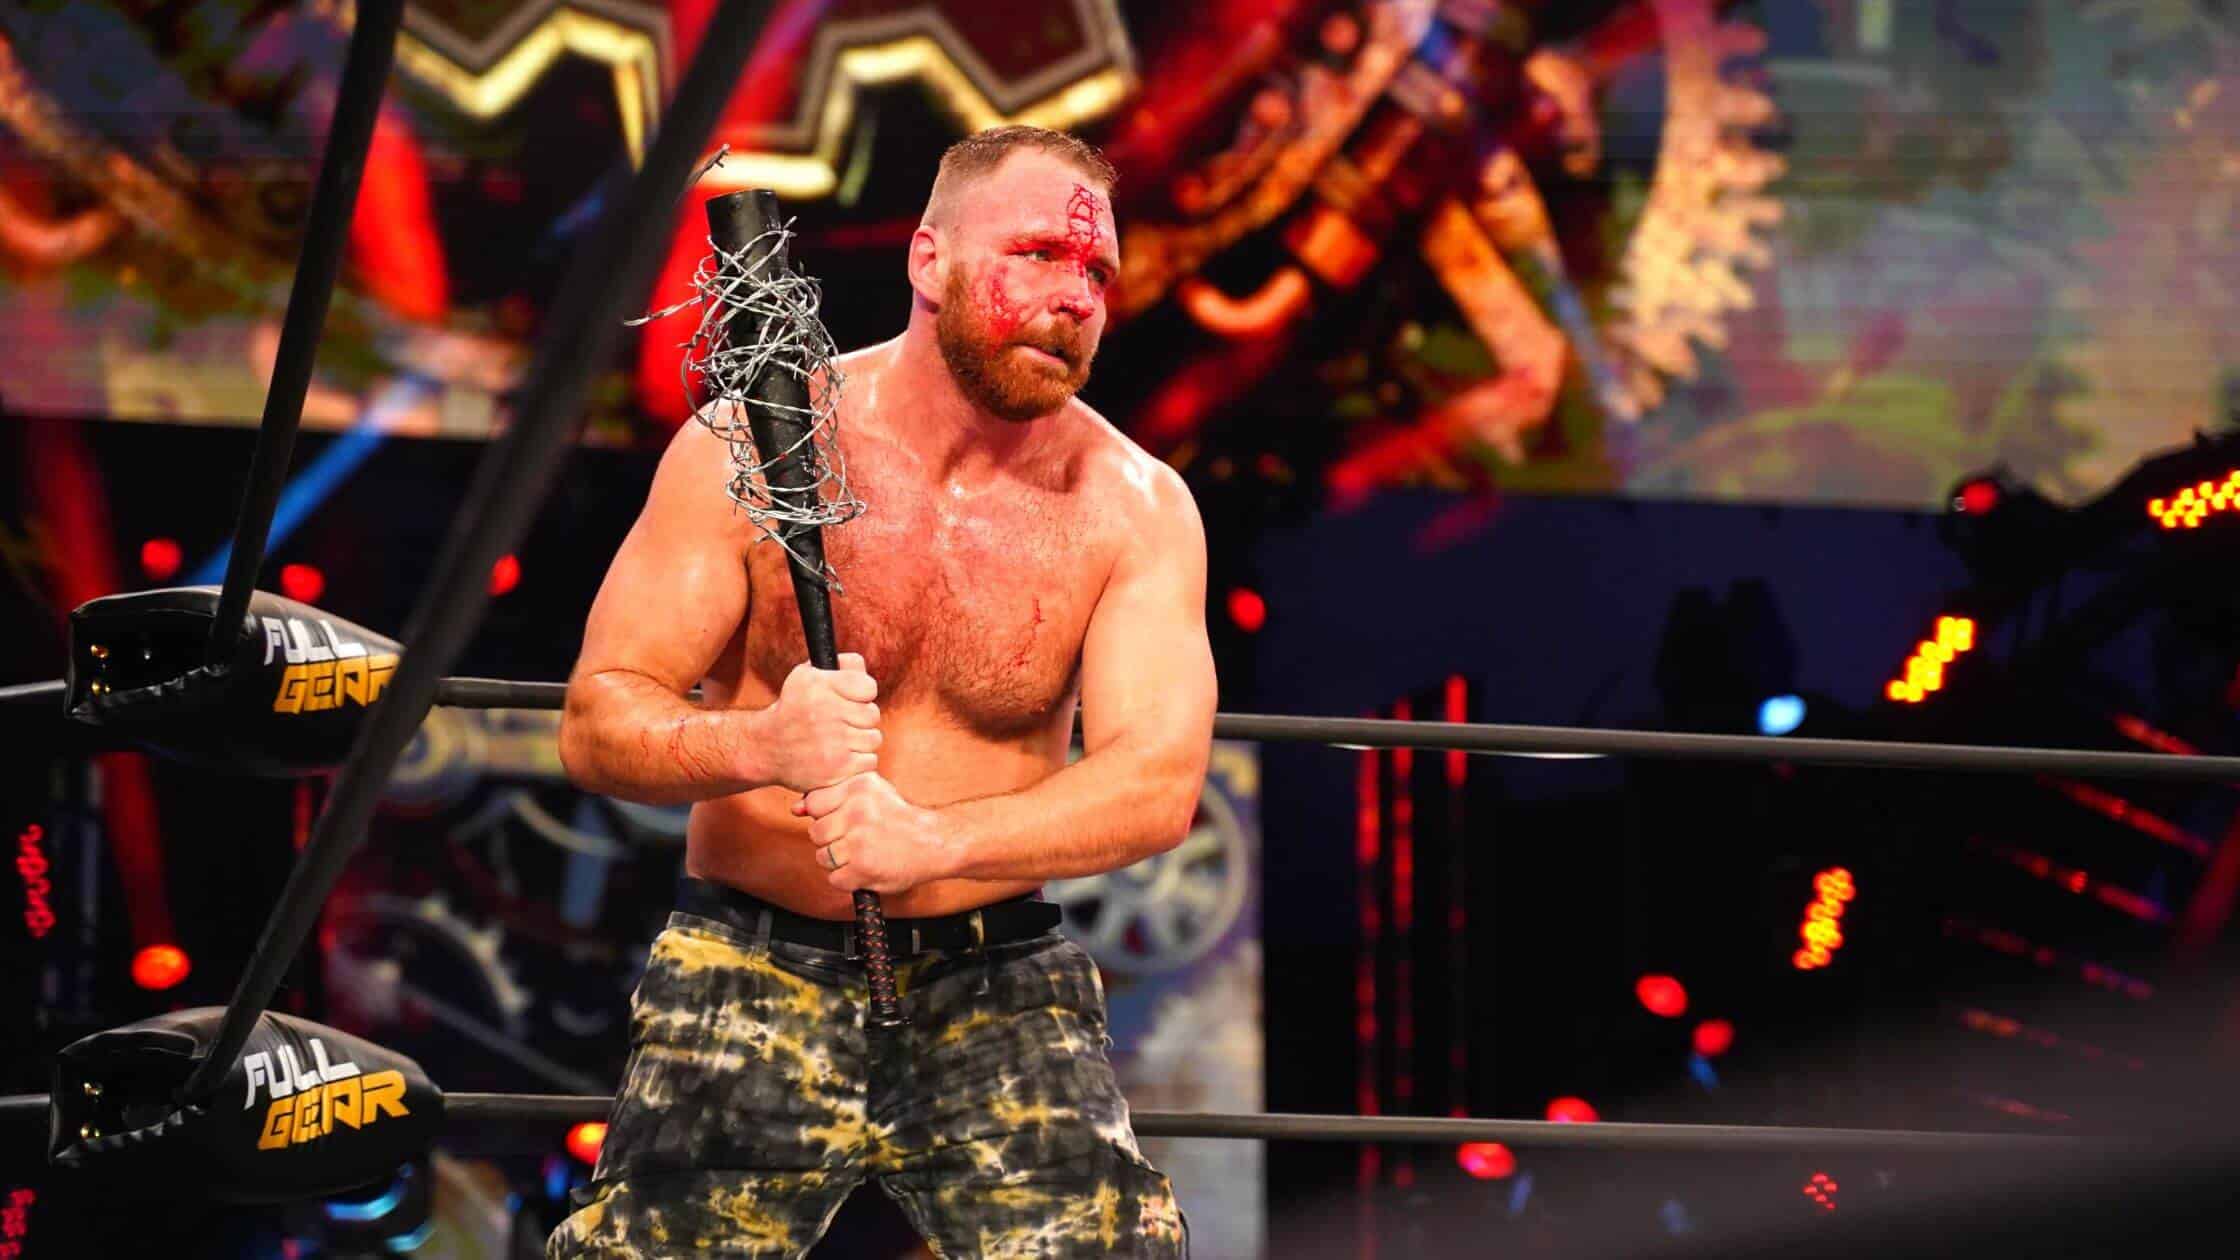 Jon Moxley Has Found New Life In Pro Wrestling